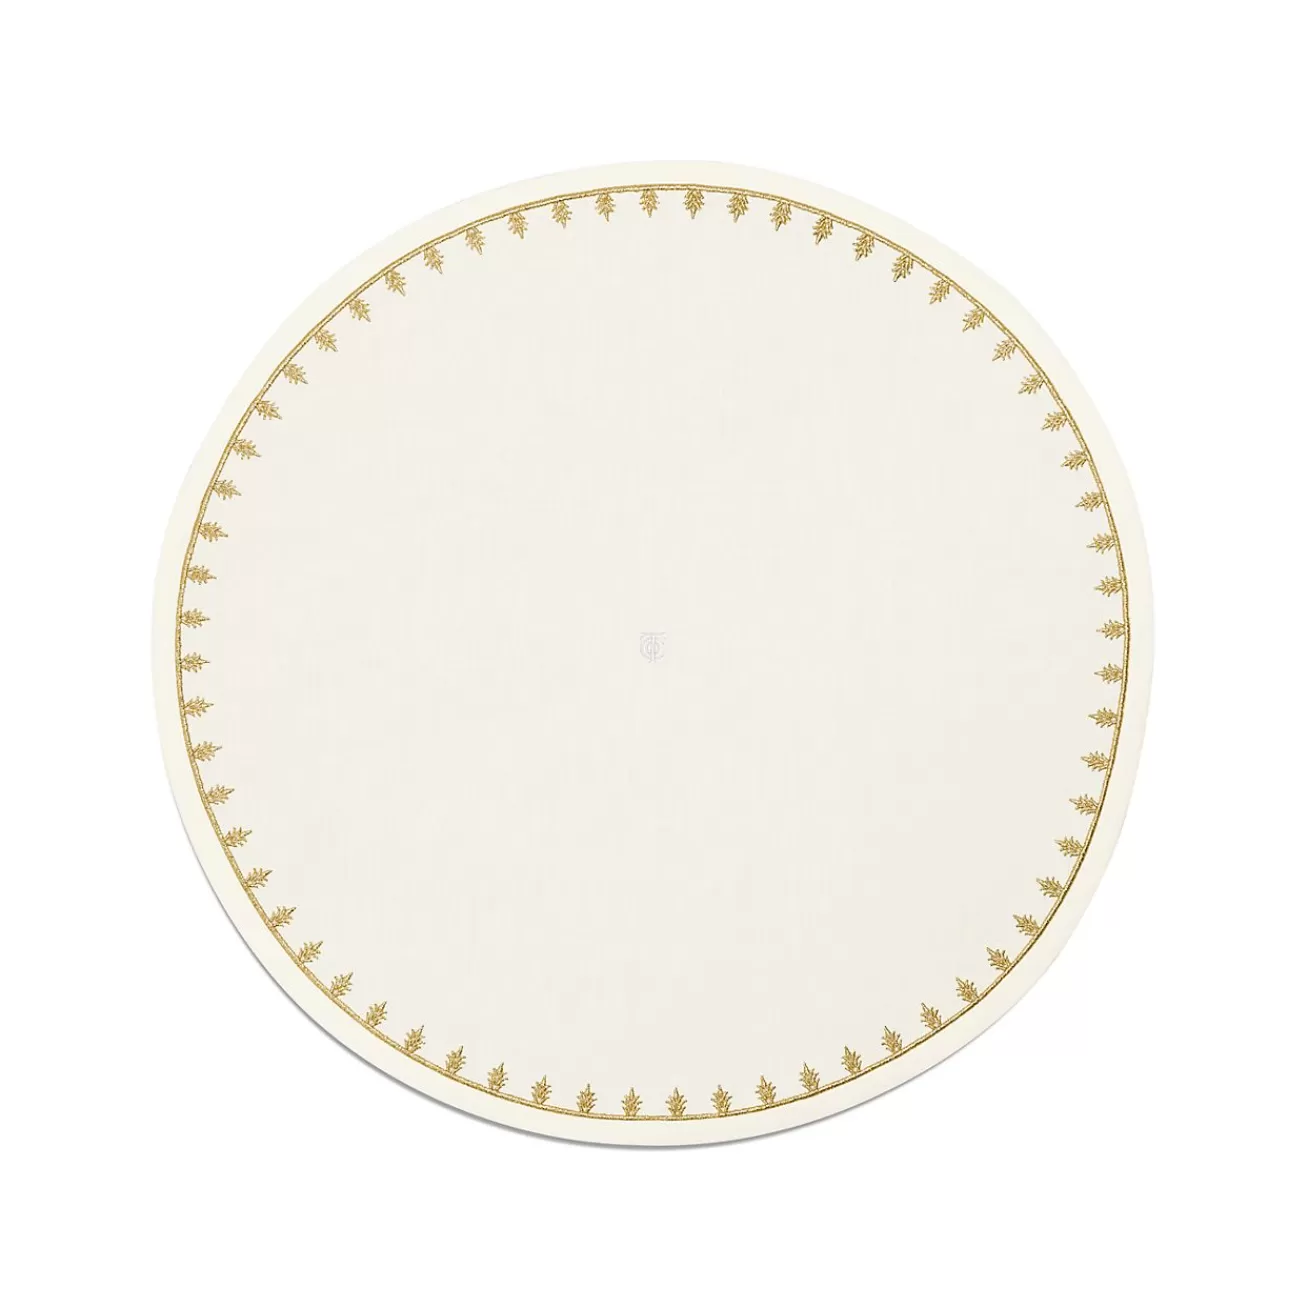 Tiffany & Co. Tiffany Crest Place Mat in Embroidered White Linen | ^ Decor | Table Linens